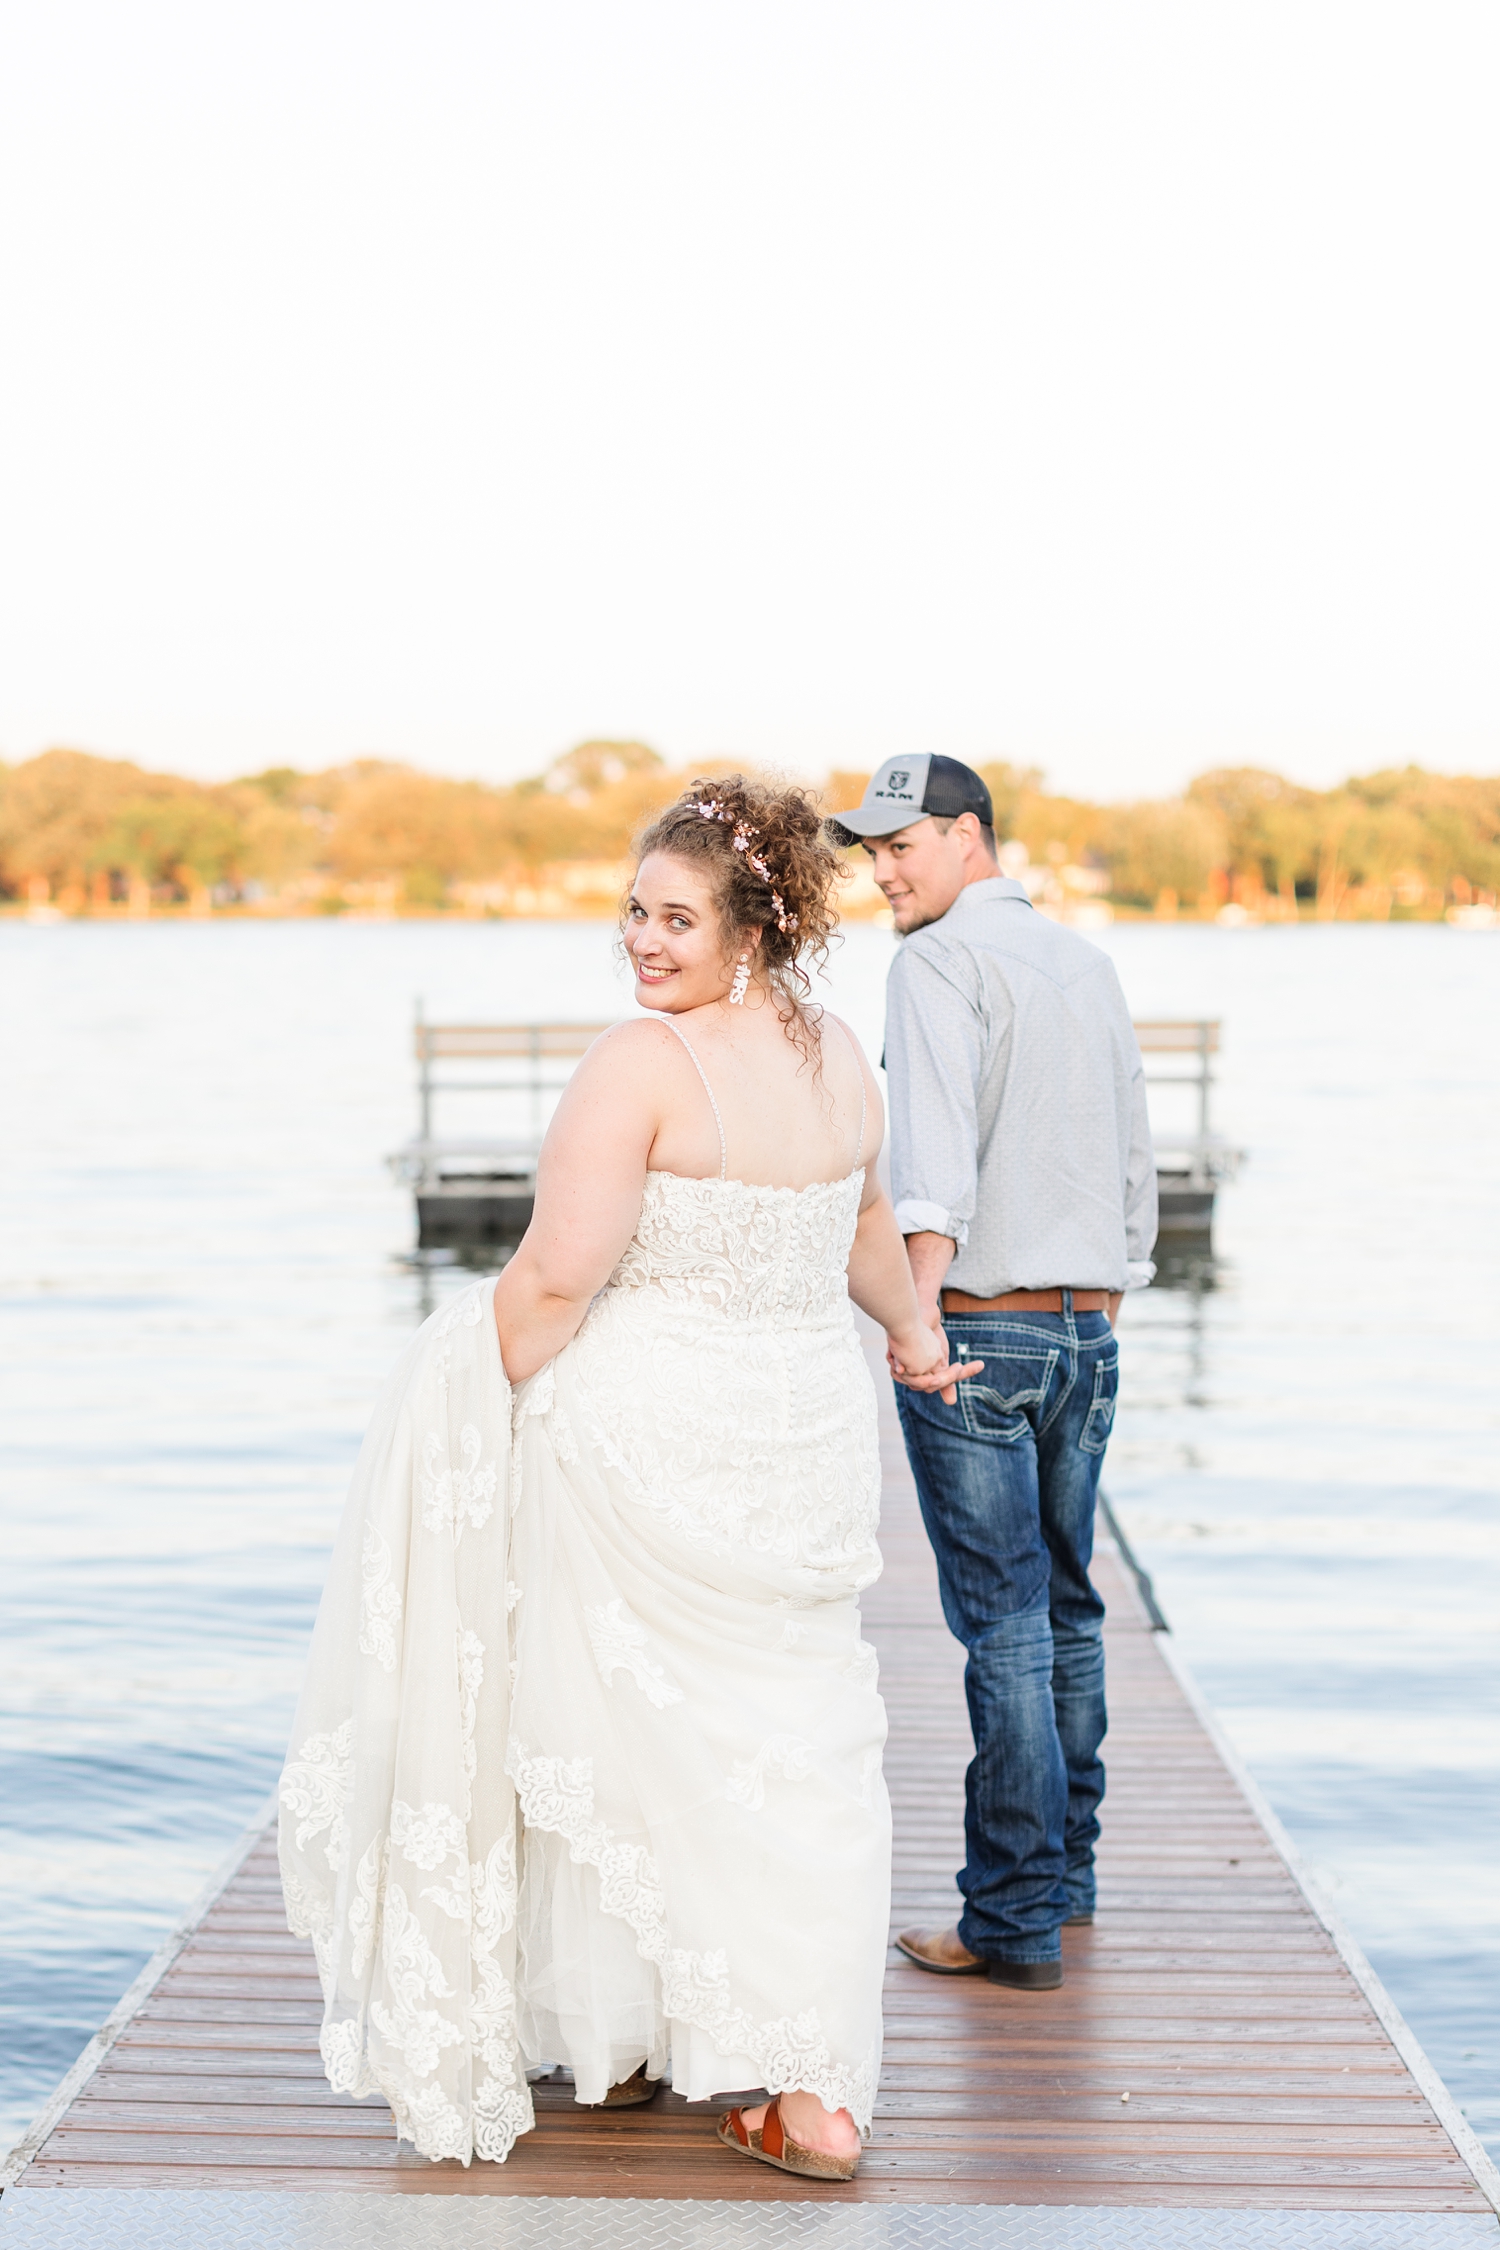 Dakota leads his new bride out on the dock at The Shores at Five Island at sunset | CB Studio